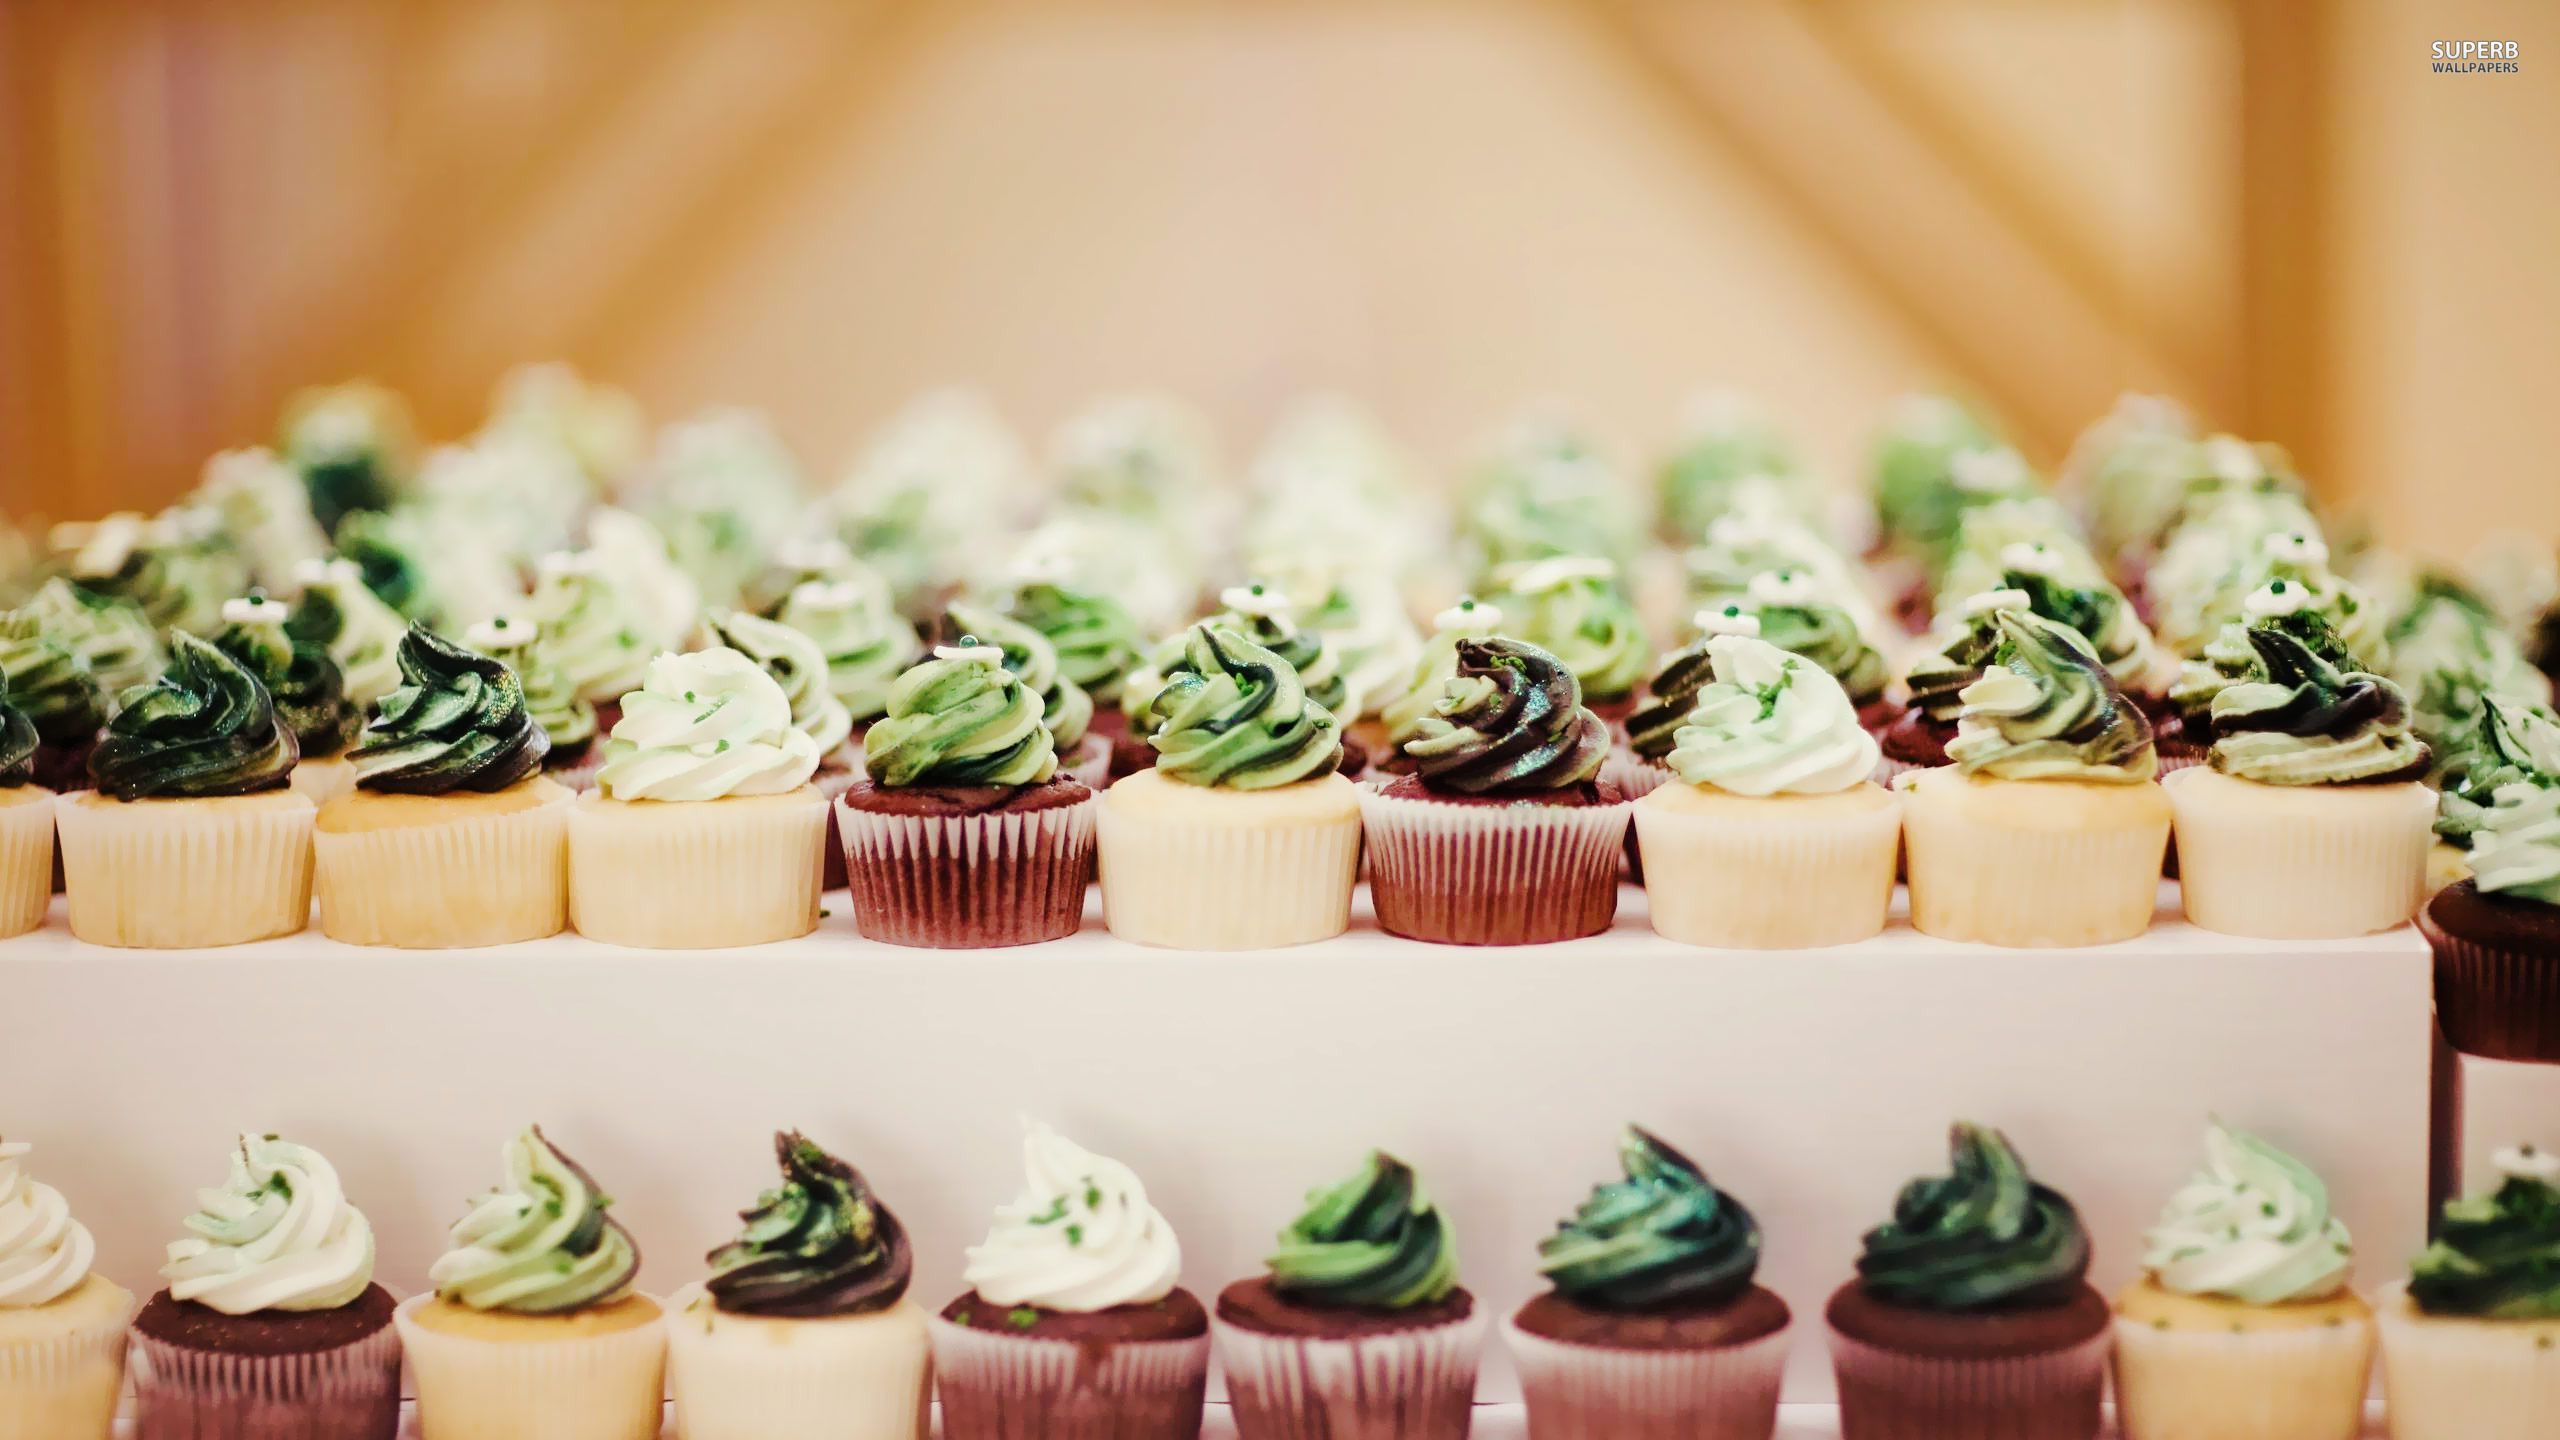 Cupcakes wallpaper - Photography wallpapers - #19383